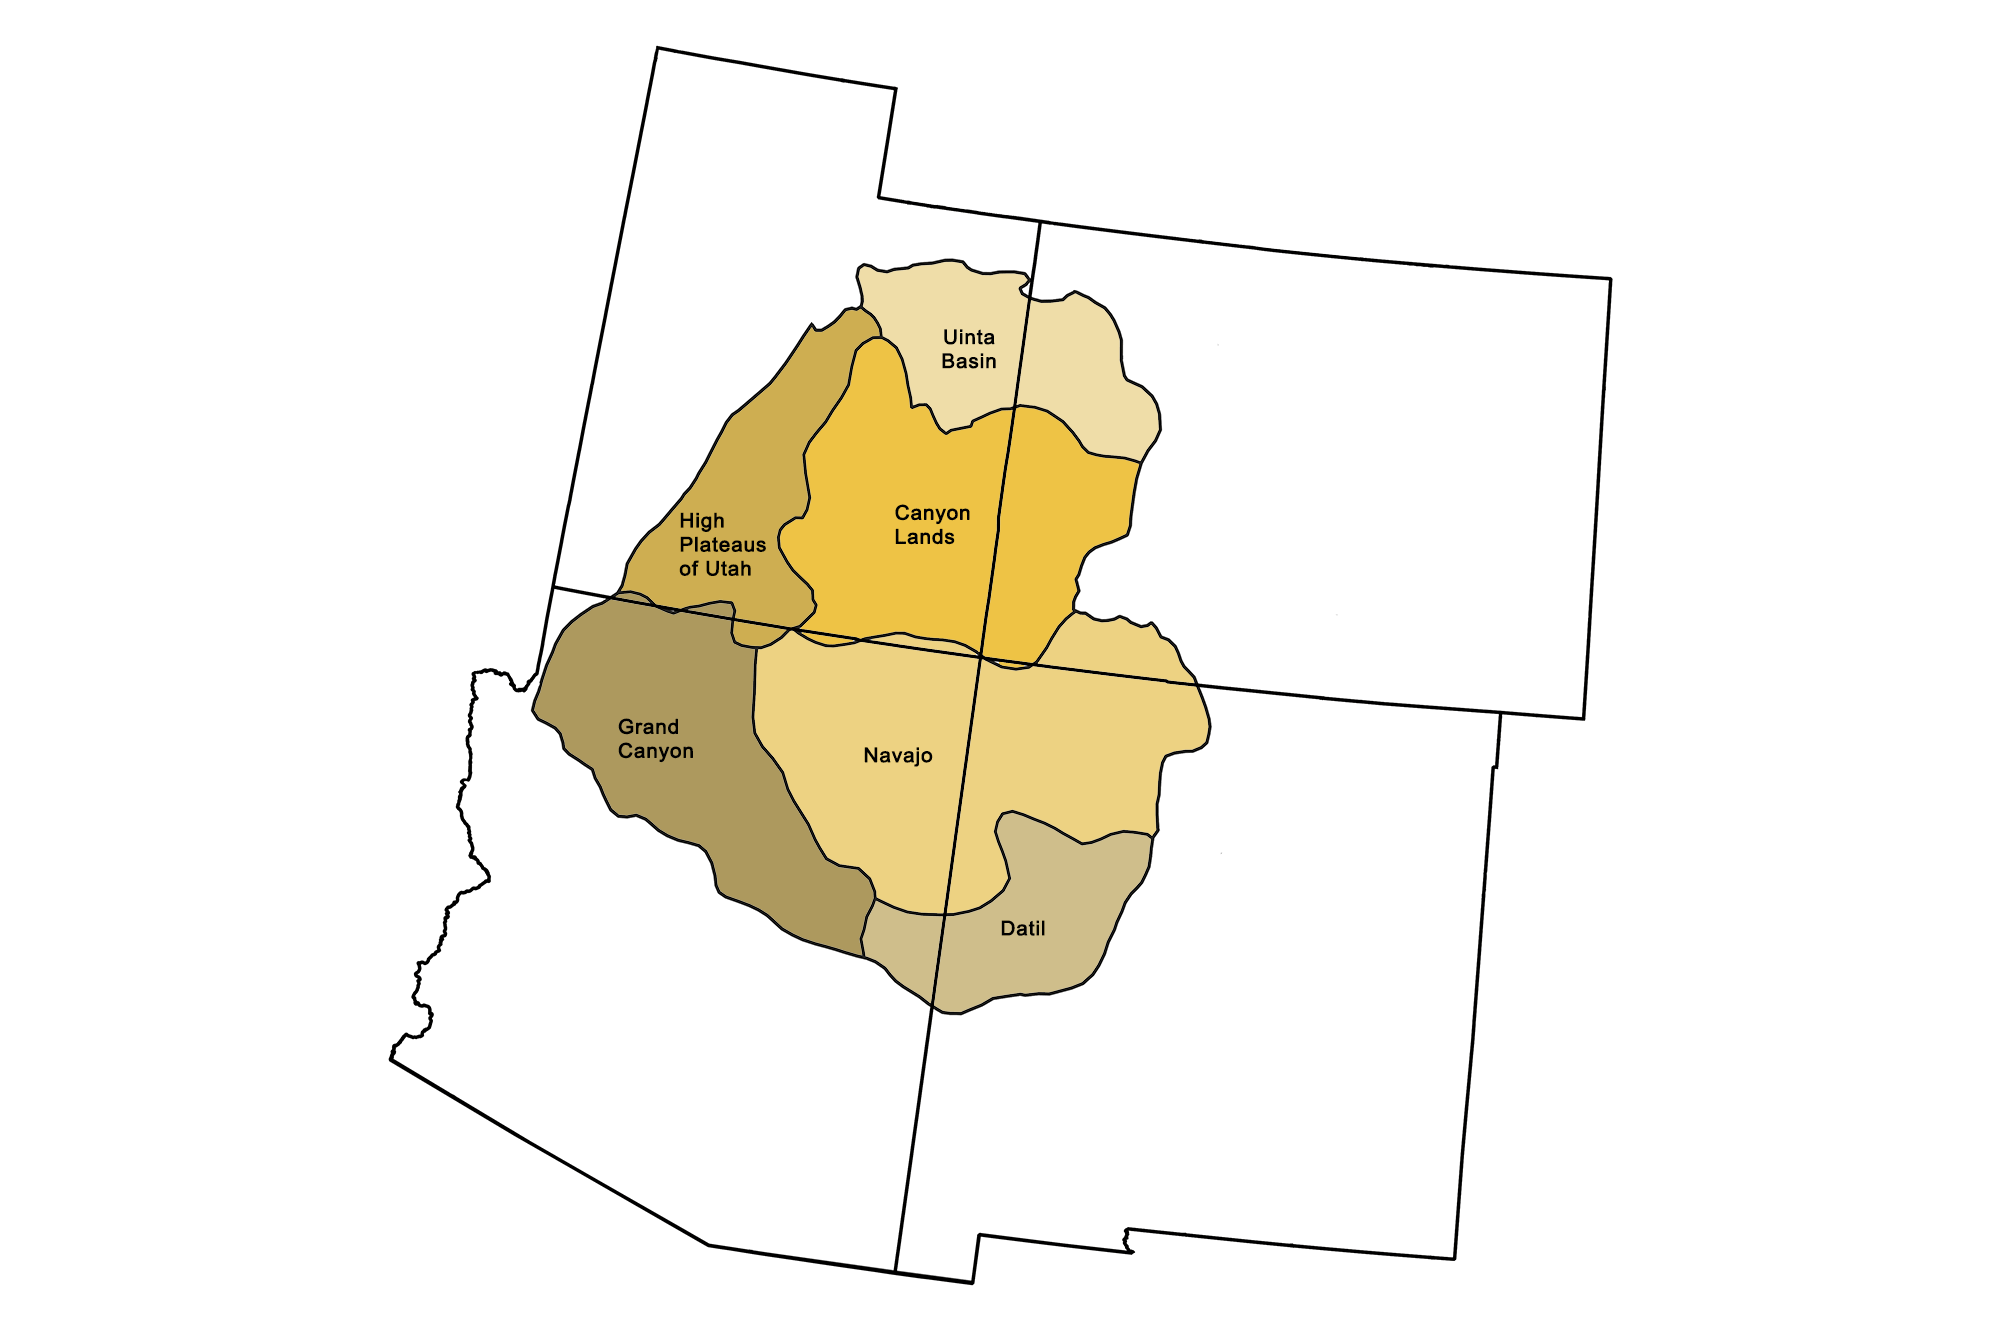 Map showing the physiographic subregions of the Colorado Plateau.